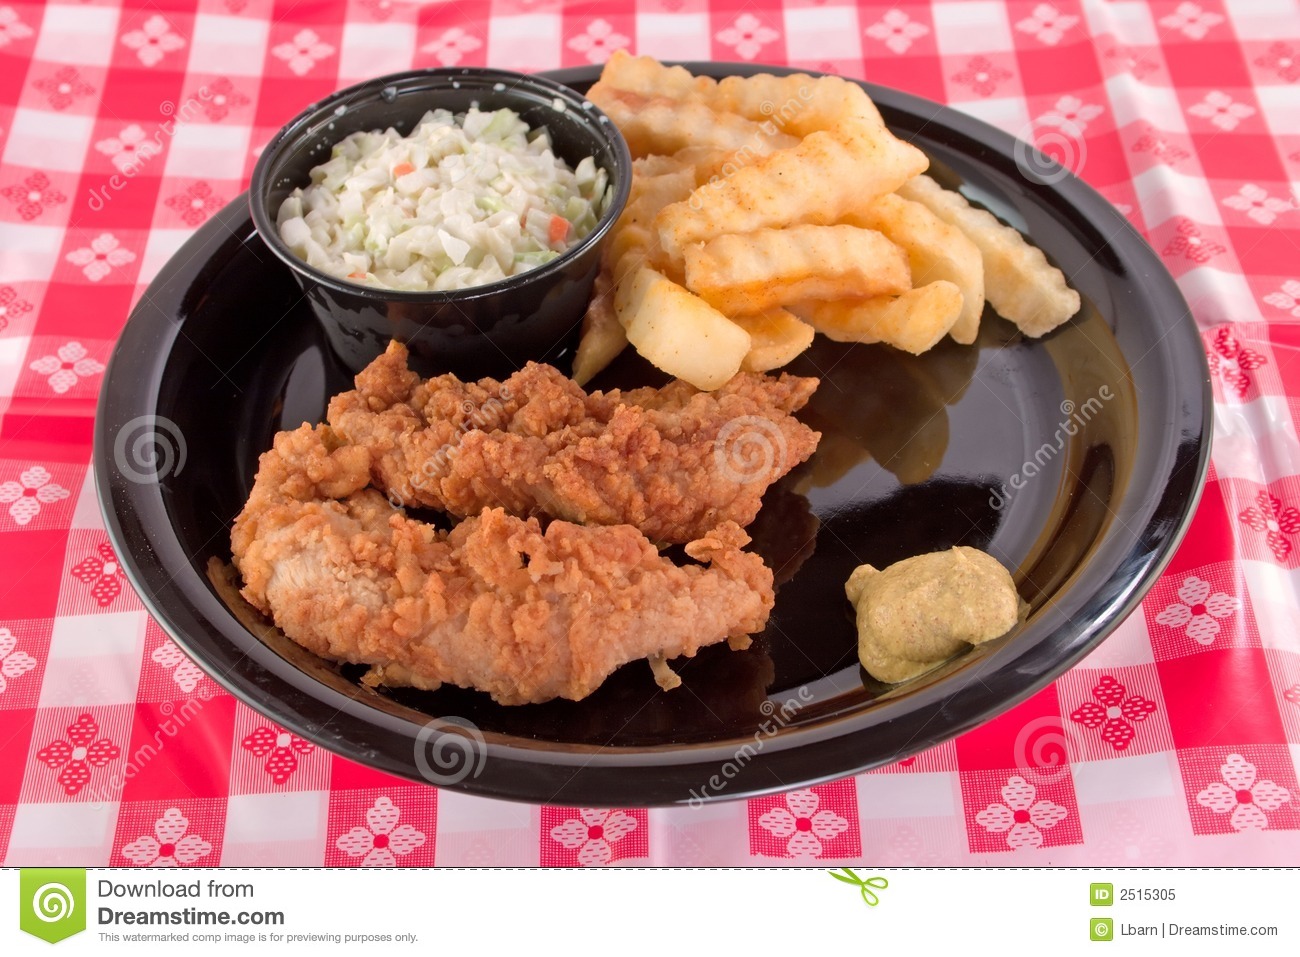 Chicken Fingers Picnic Lunch Royalty Free Stock Photo   Image  2515305